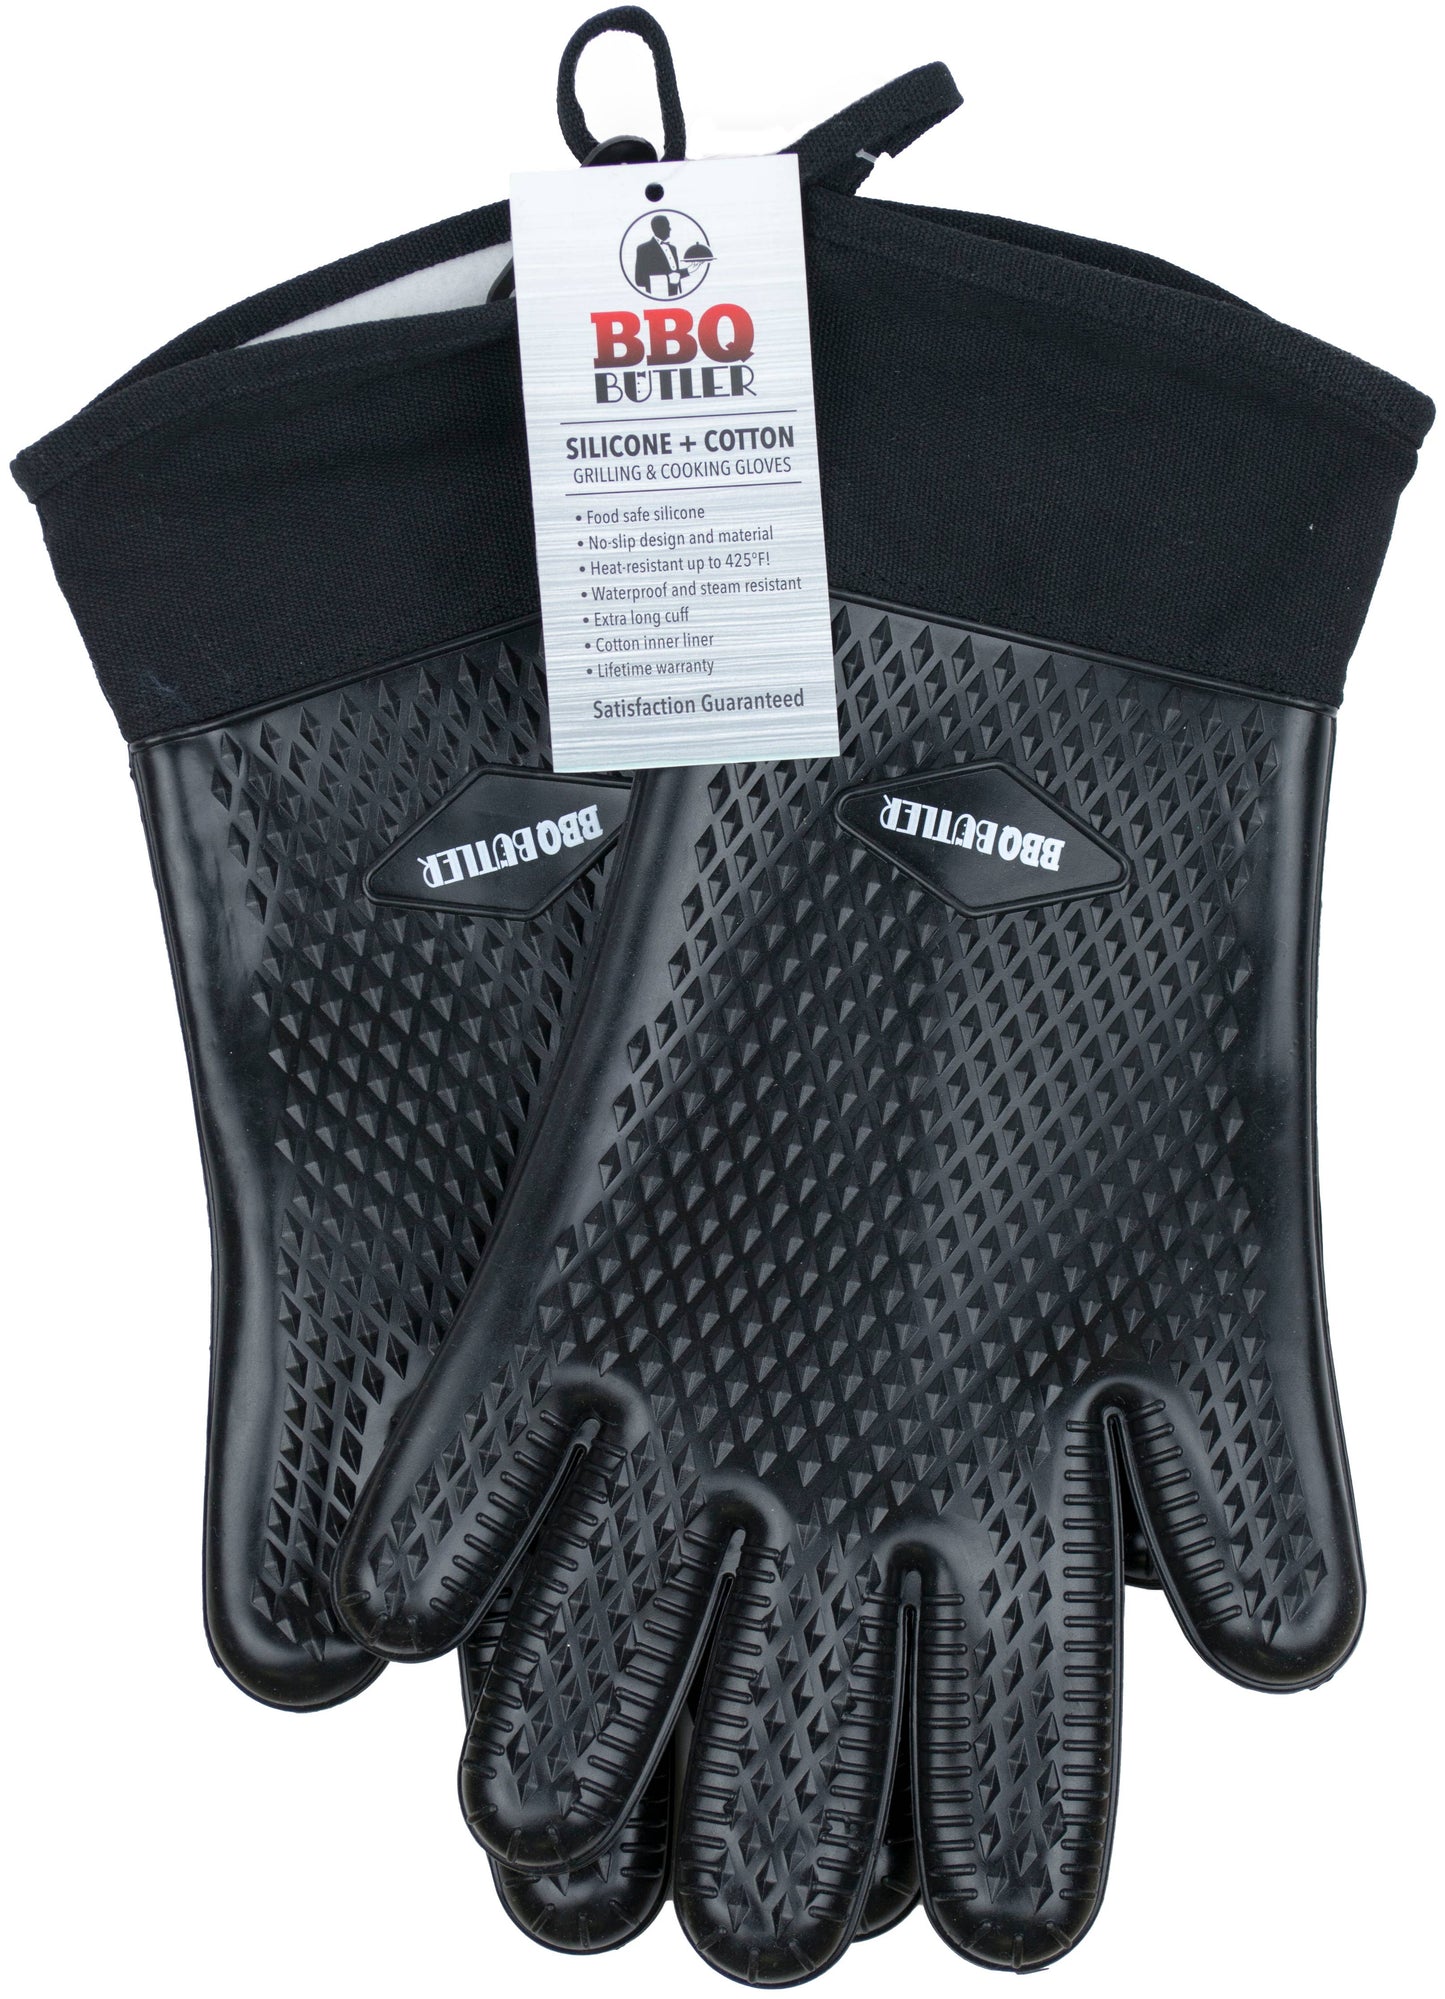 The BBQ Butler - Cloth Lined Silicone Gloves